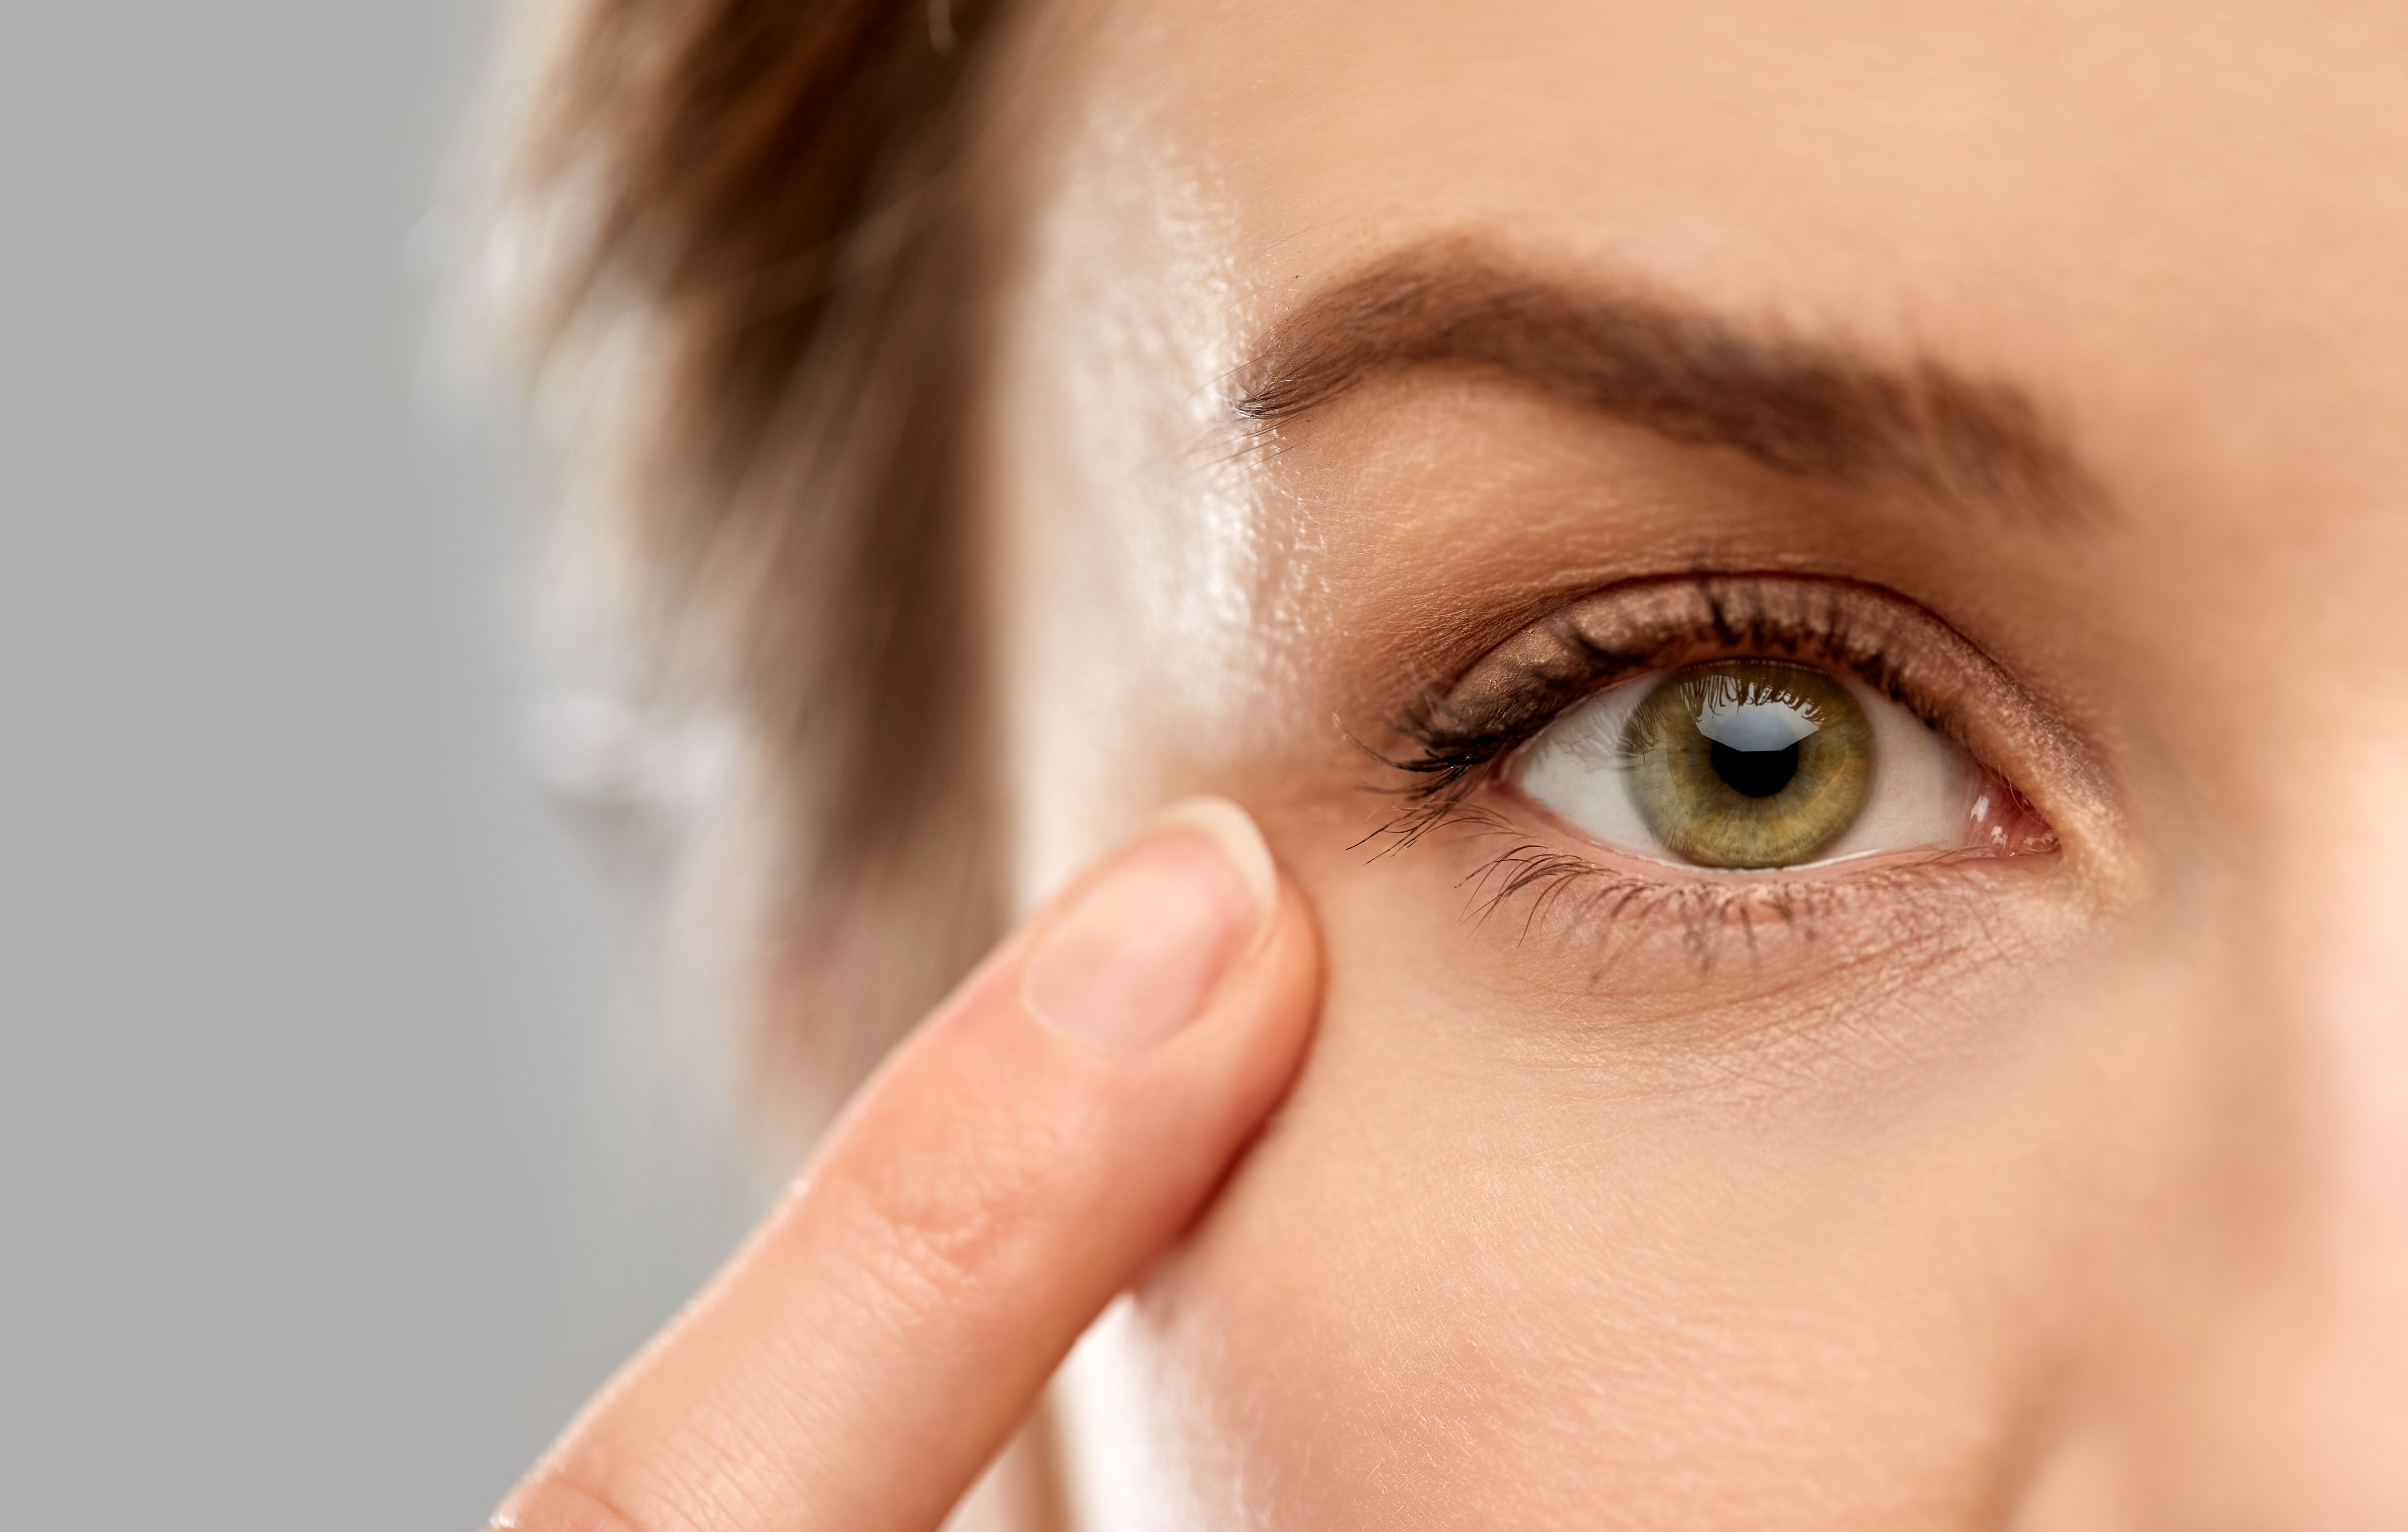 Applying Burt's Bees to the eyelids can result in chemical irritation to the eyelids themselves, and ophthalmologists will see redness, swelling, and inflammation in these patients. (Adobe Stock image)